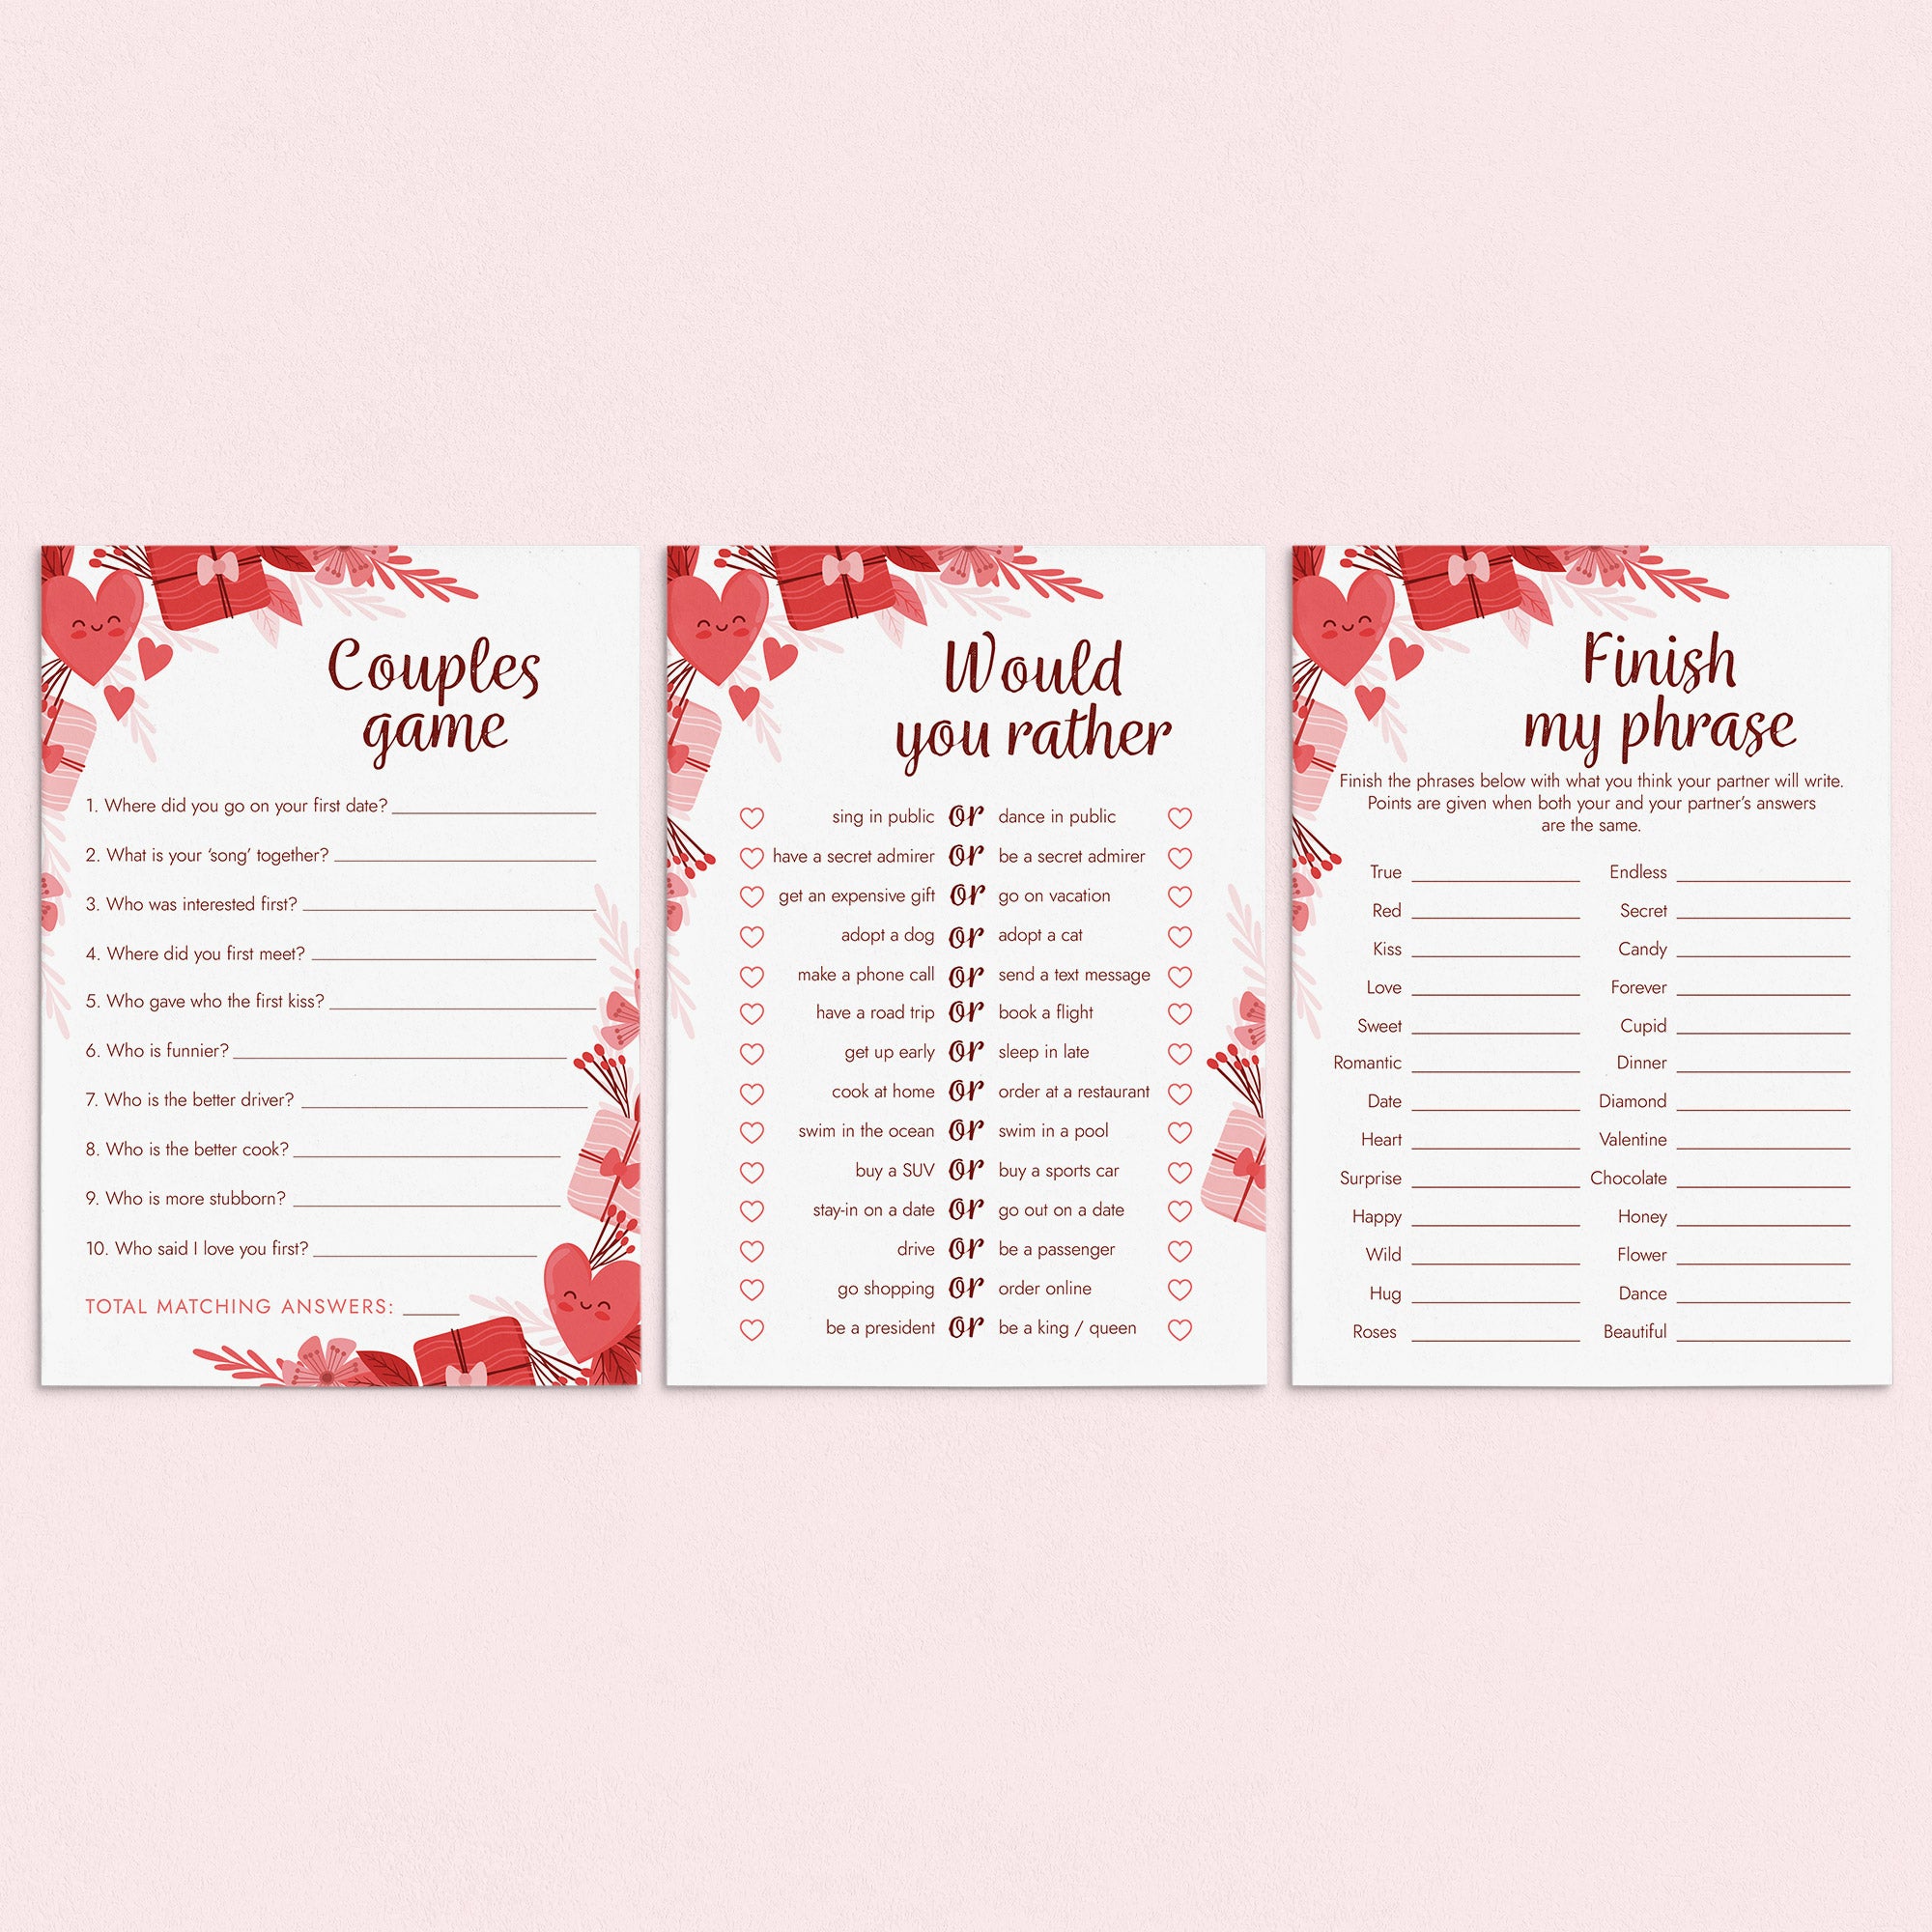 Date Night Games Bundle for Couples Printable, Instant Download